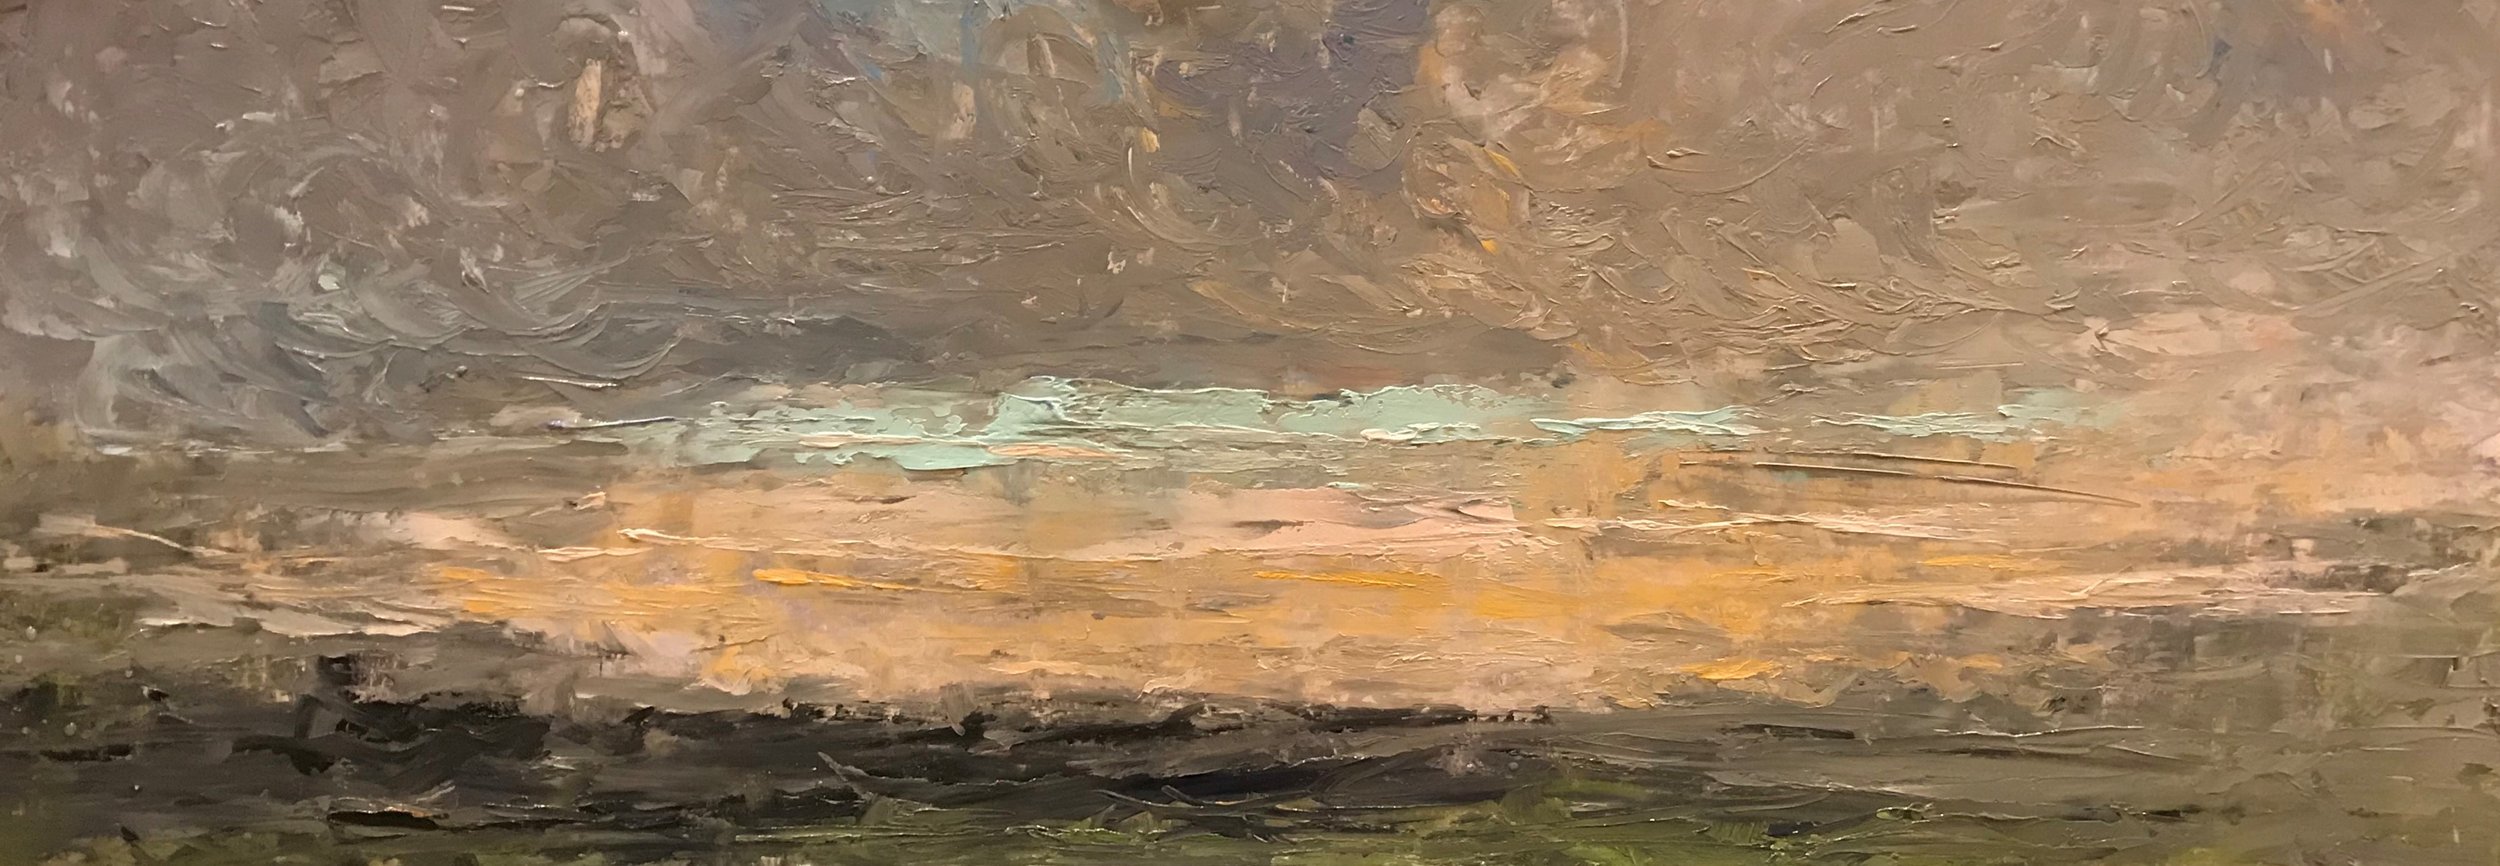 20-05-11  Crazy sky abstraction OIl on Panel  9 x 24 inches - Copy.jpg